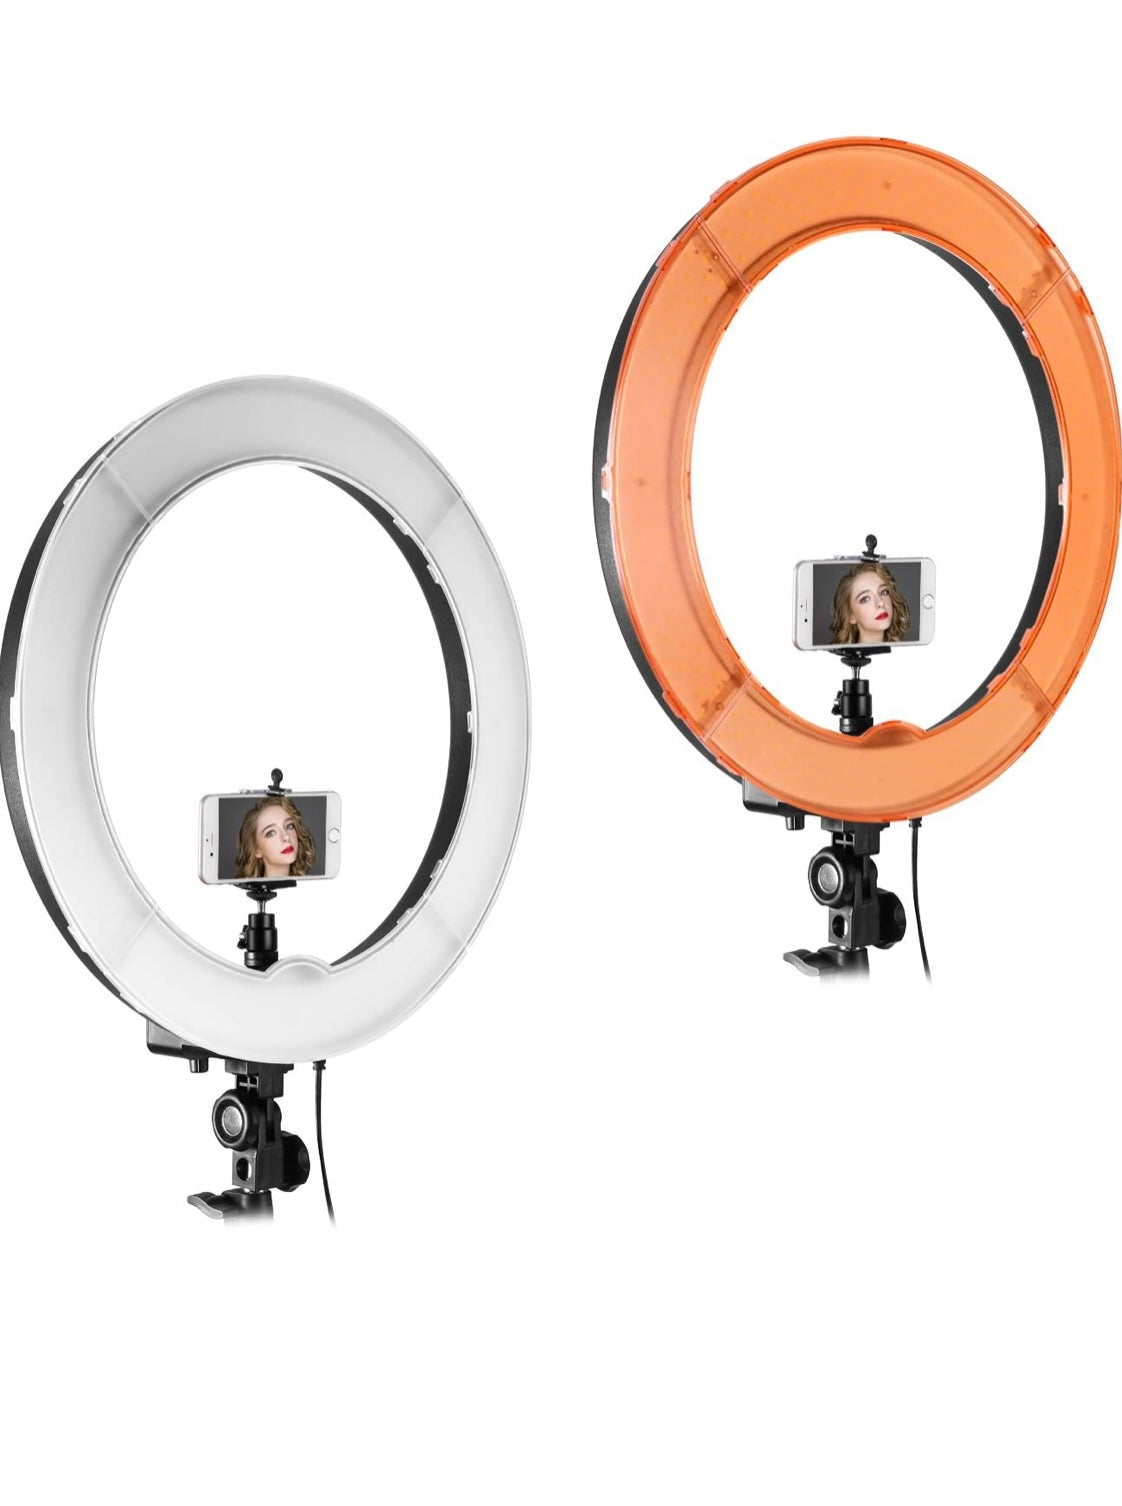 RING LIGHT IDEAL FOR LASH EXTENSIONS APPLICATION